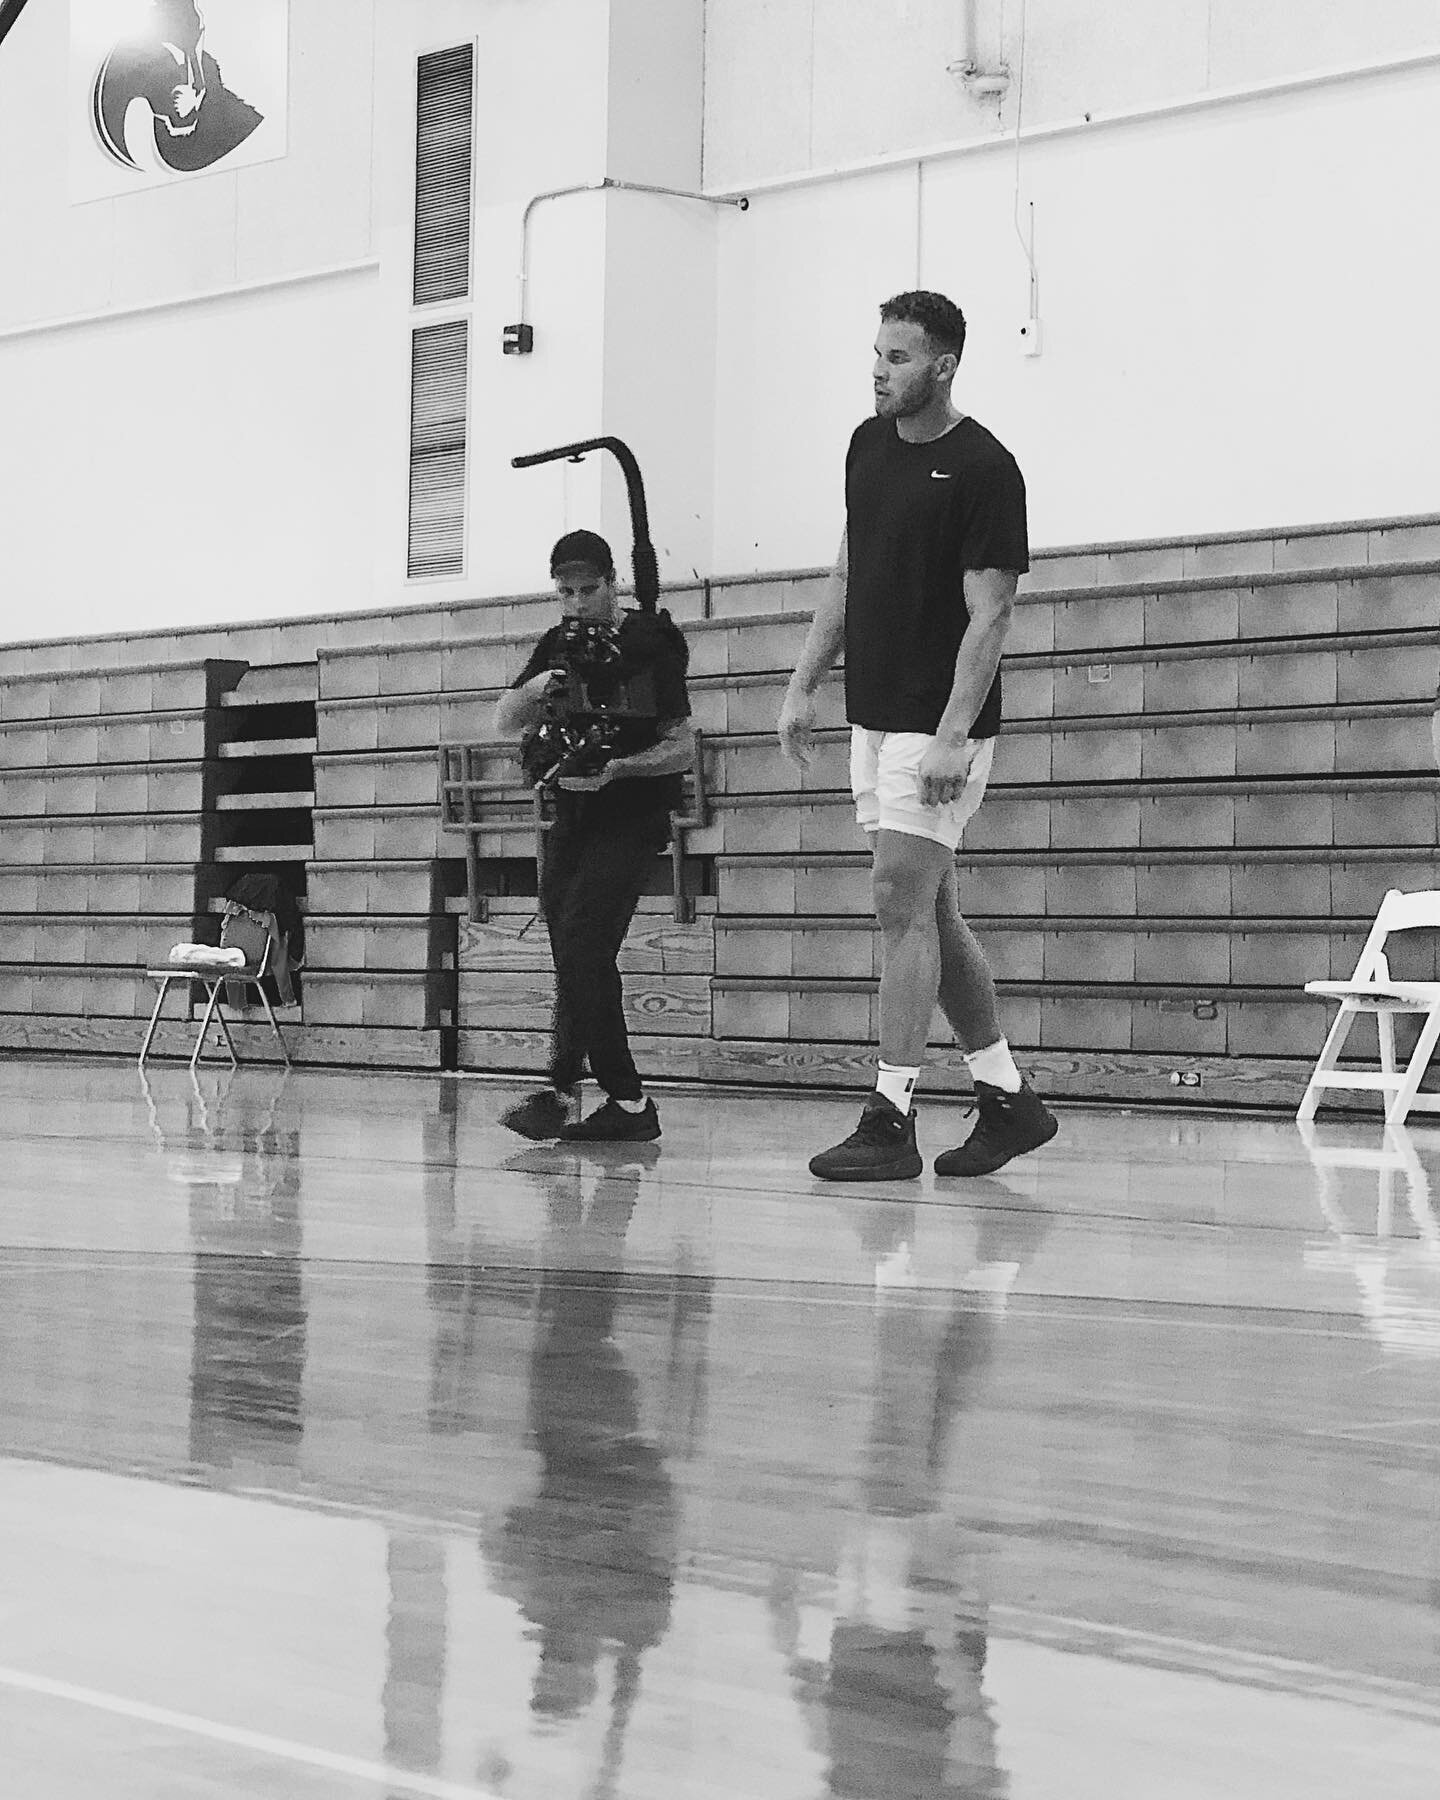 Directing / Shooting Blake Griffin today for a secret project that has been in the making for the last 2 months. On to the next one. @blakegriffin23